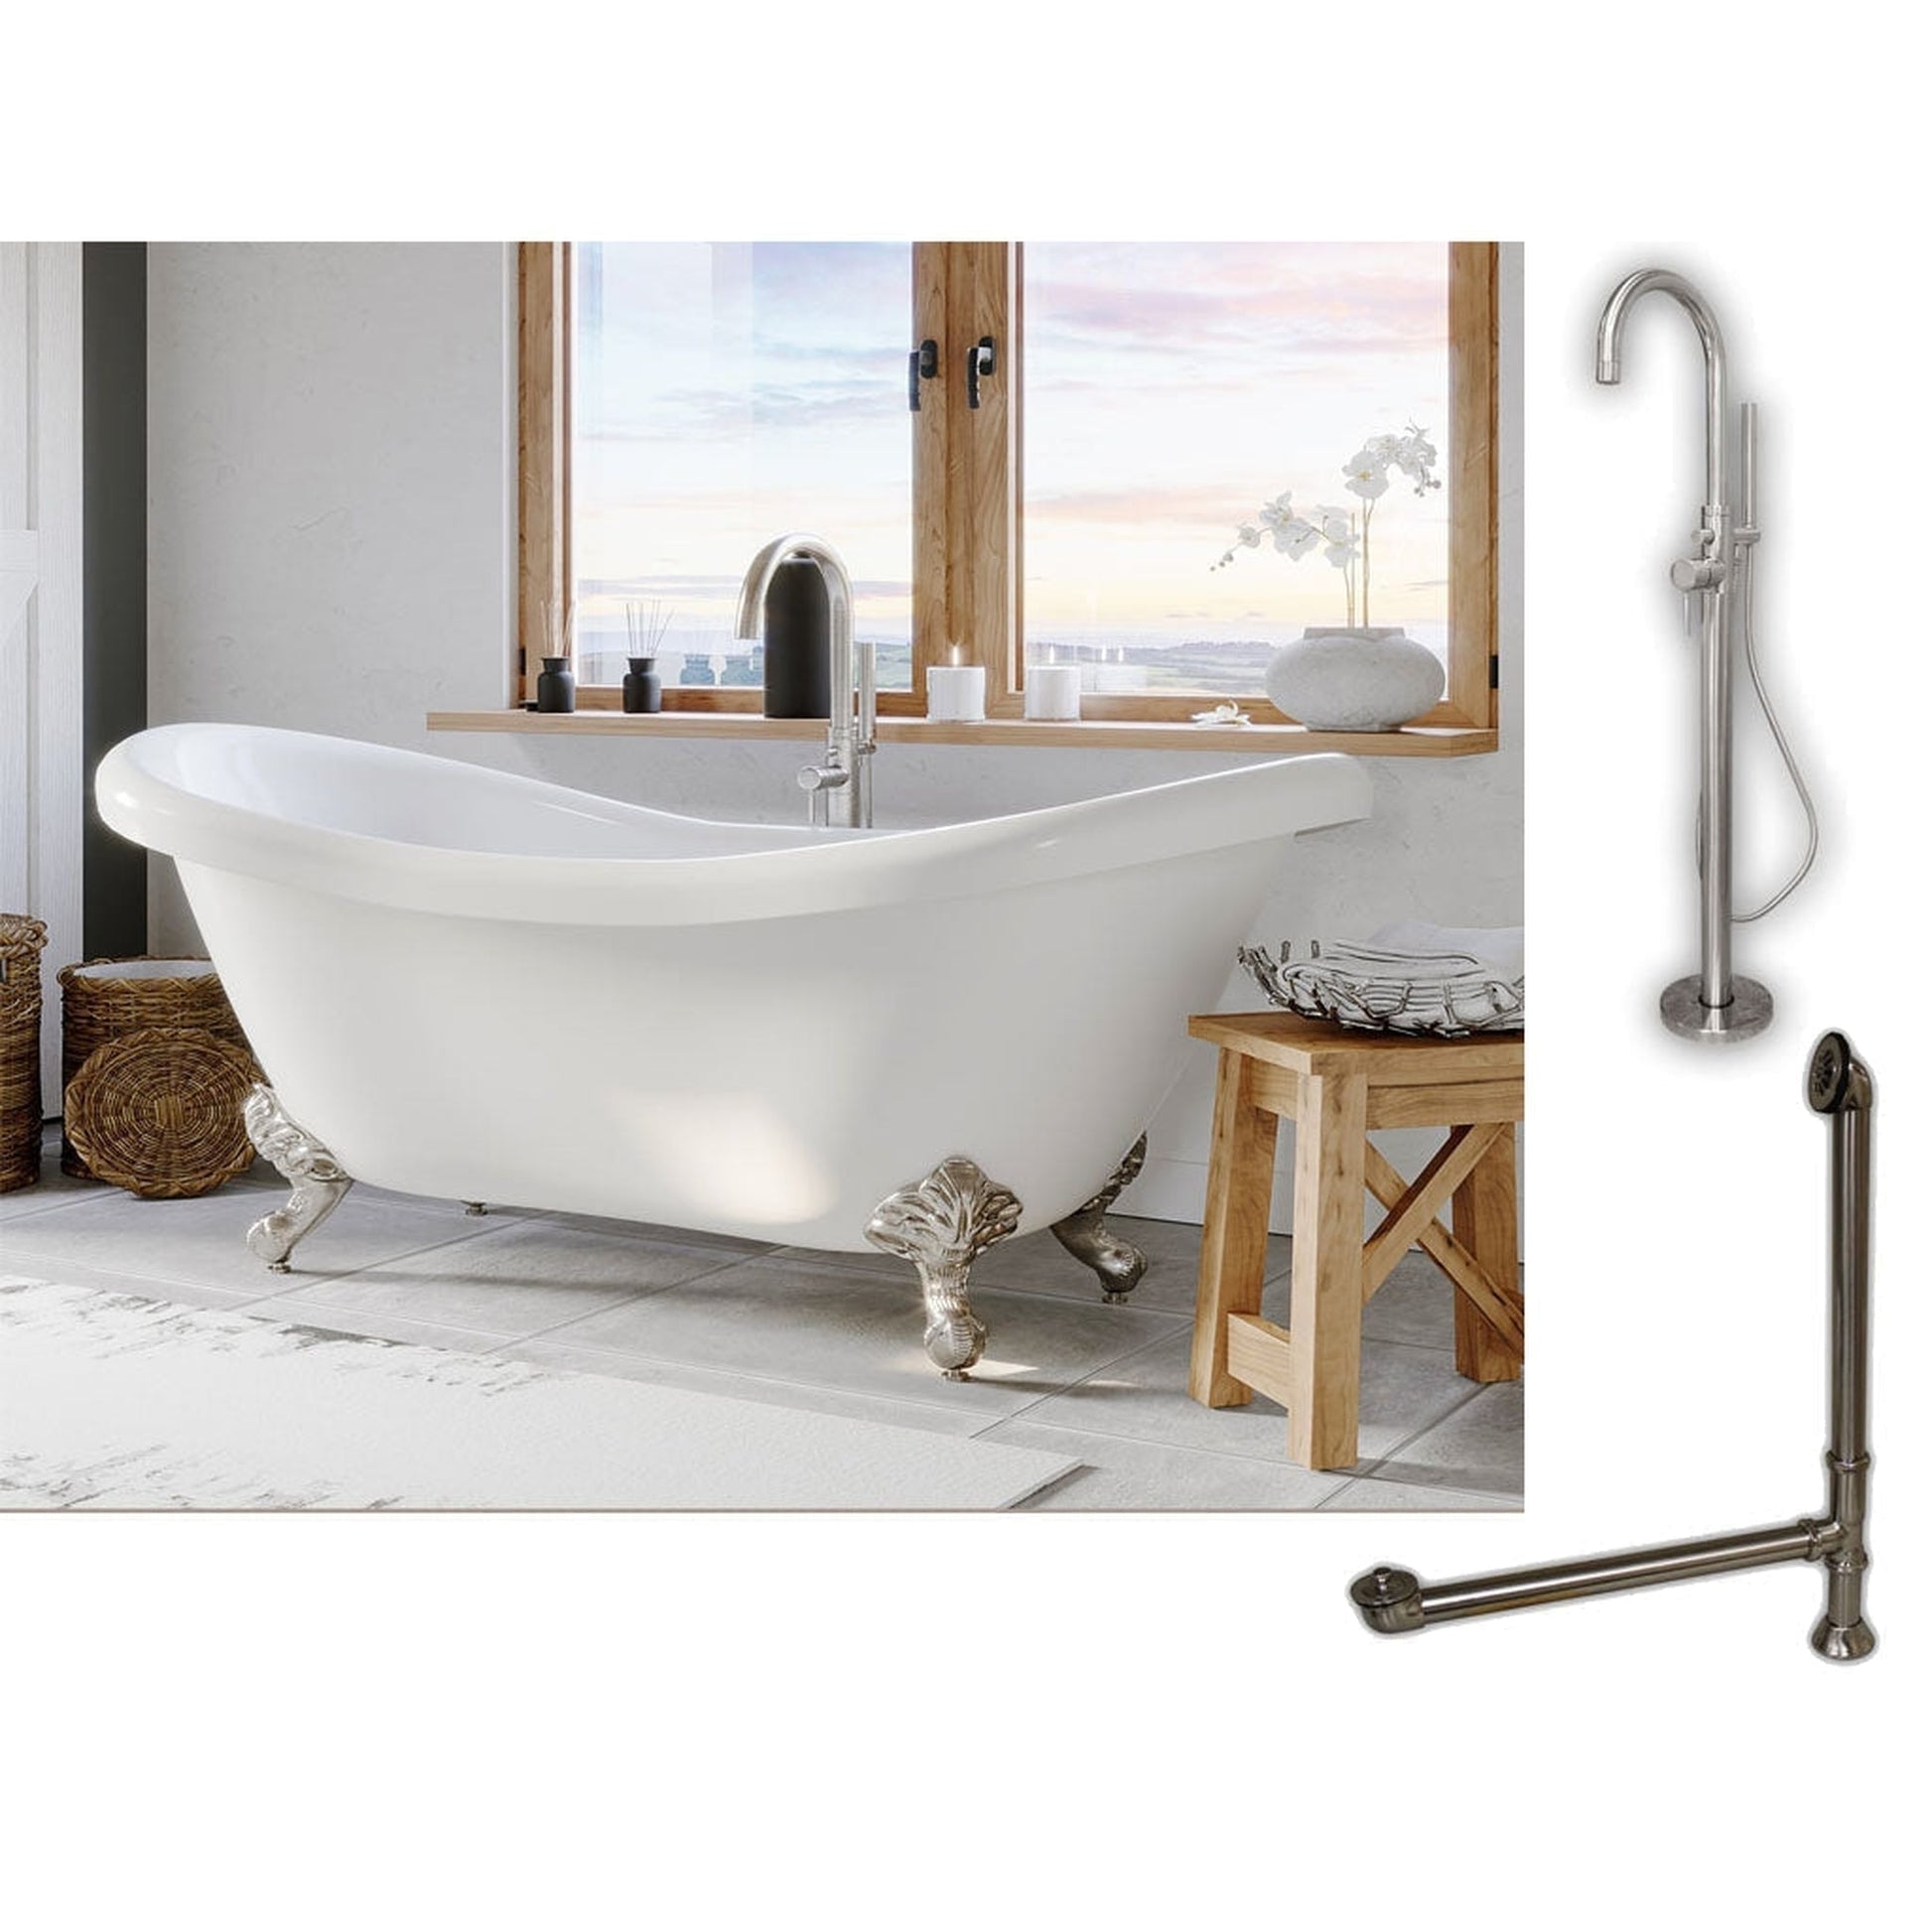 Cambridge Plumbing 69" White Double Slipper Clawfoot Acrylic Bathtub With No Deck Holes And Complete Plumbing Package Including Modern Floor Mounted Faucet, Drain And Overflow Assembly In Brushed Nickel